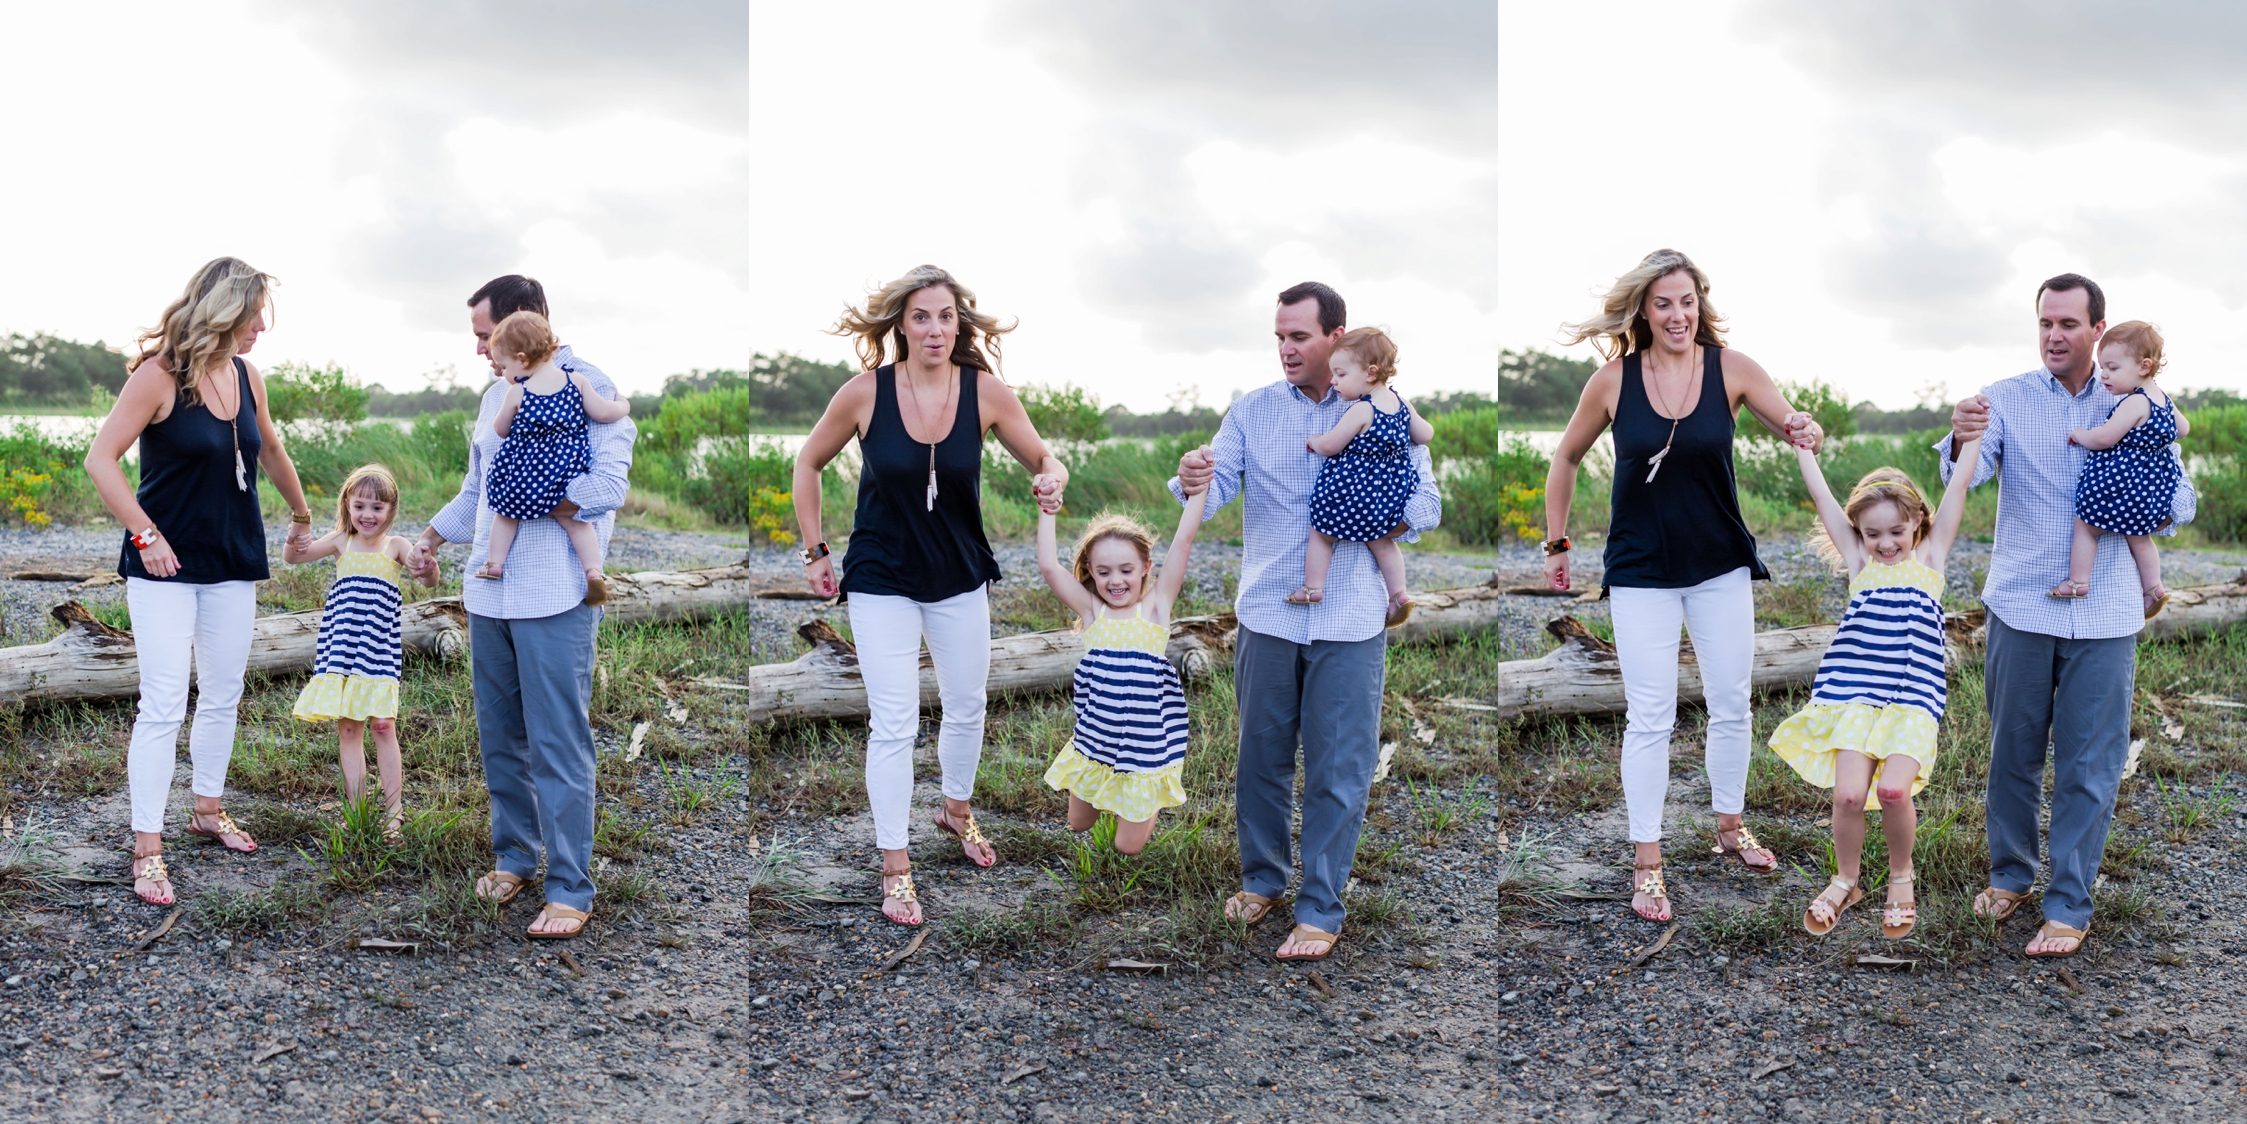 Beautiful Virginia Outdoor Family Lifestyle Session by Brooke Tucker Photography